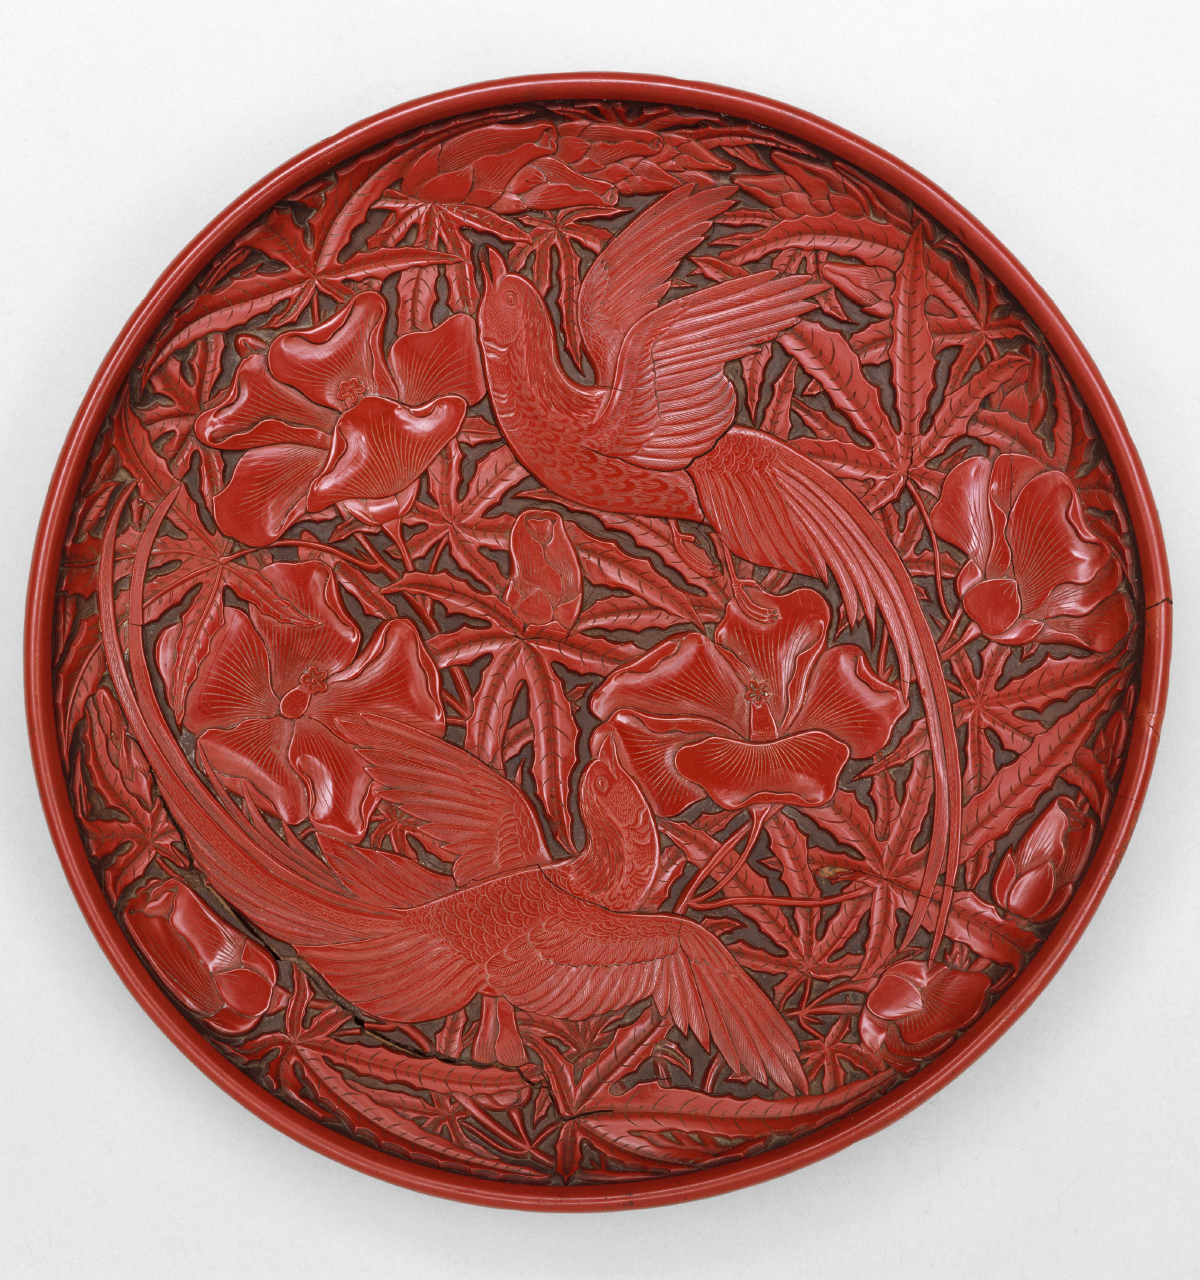 Dish with long-tailed birds and hollyhock